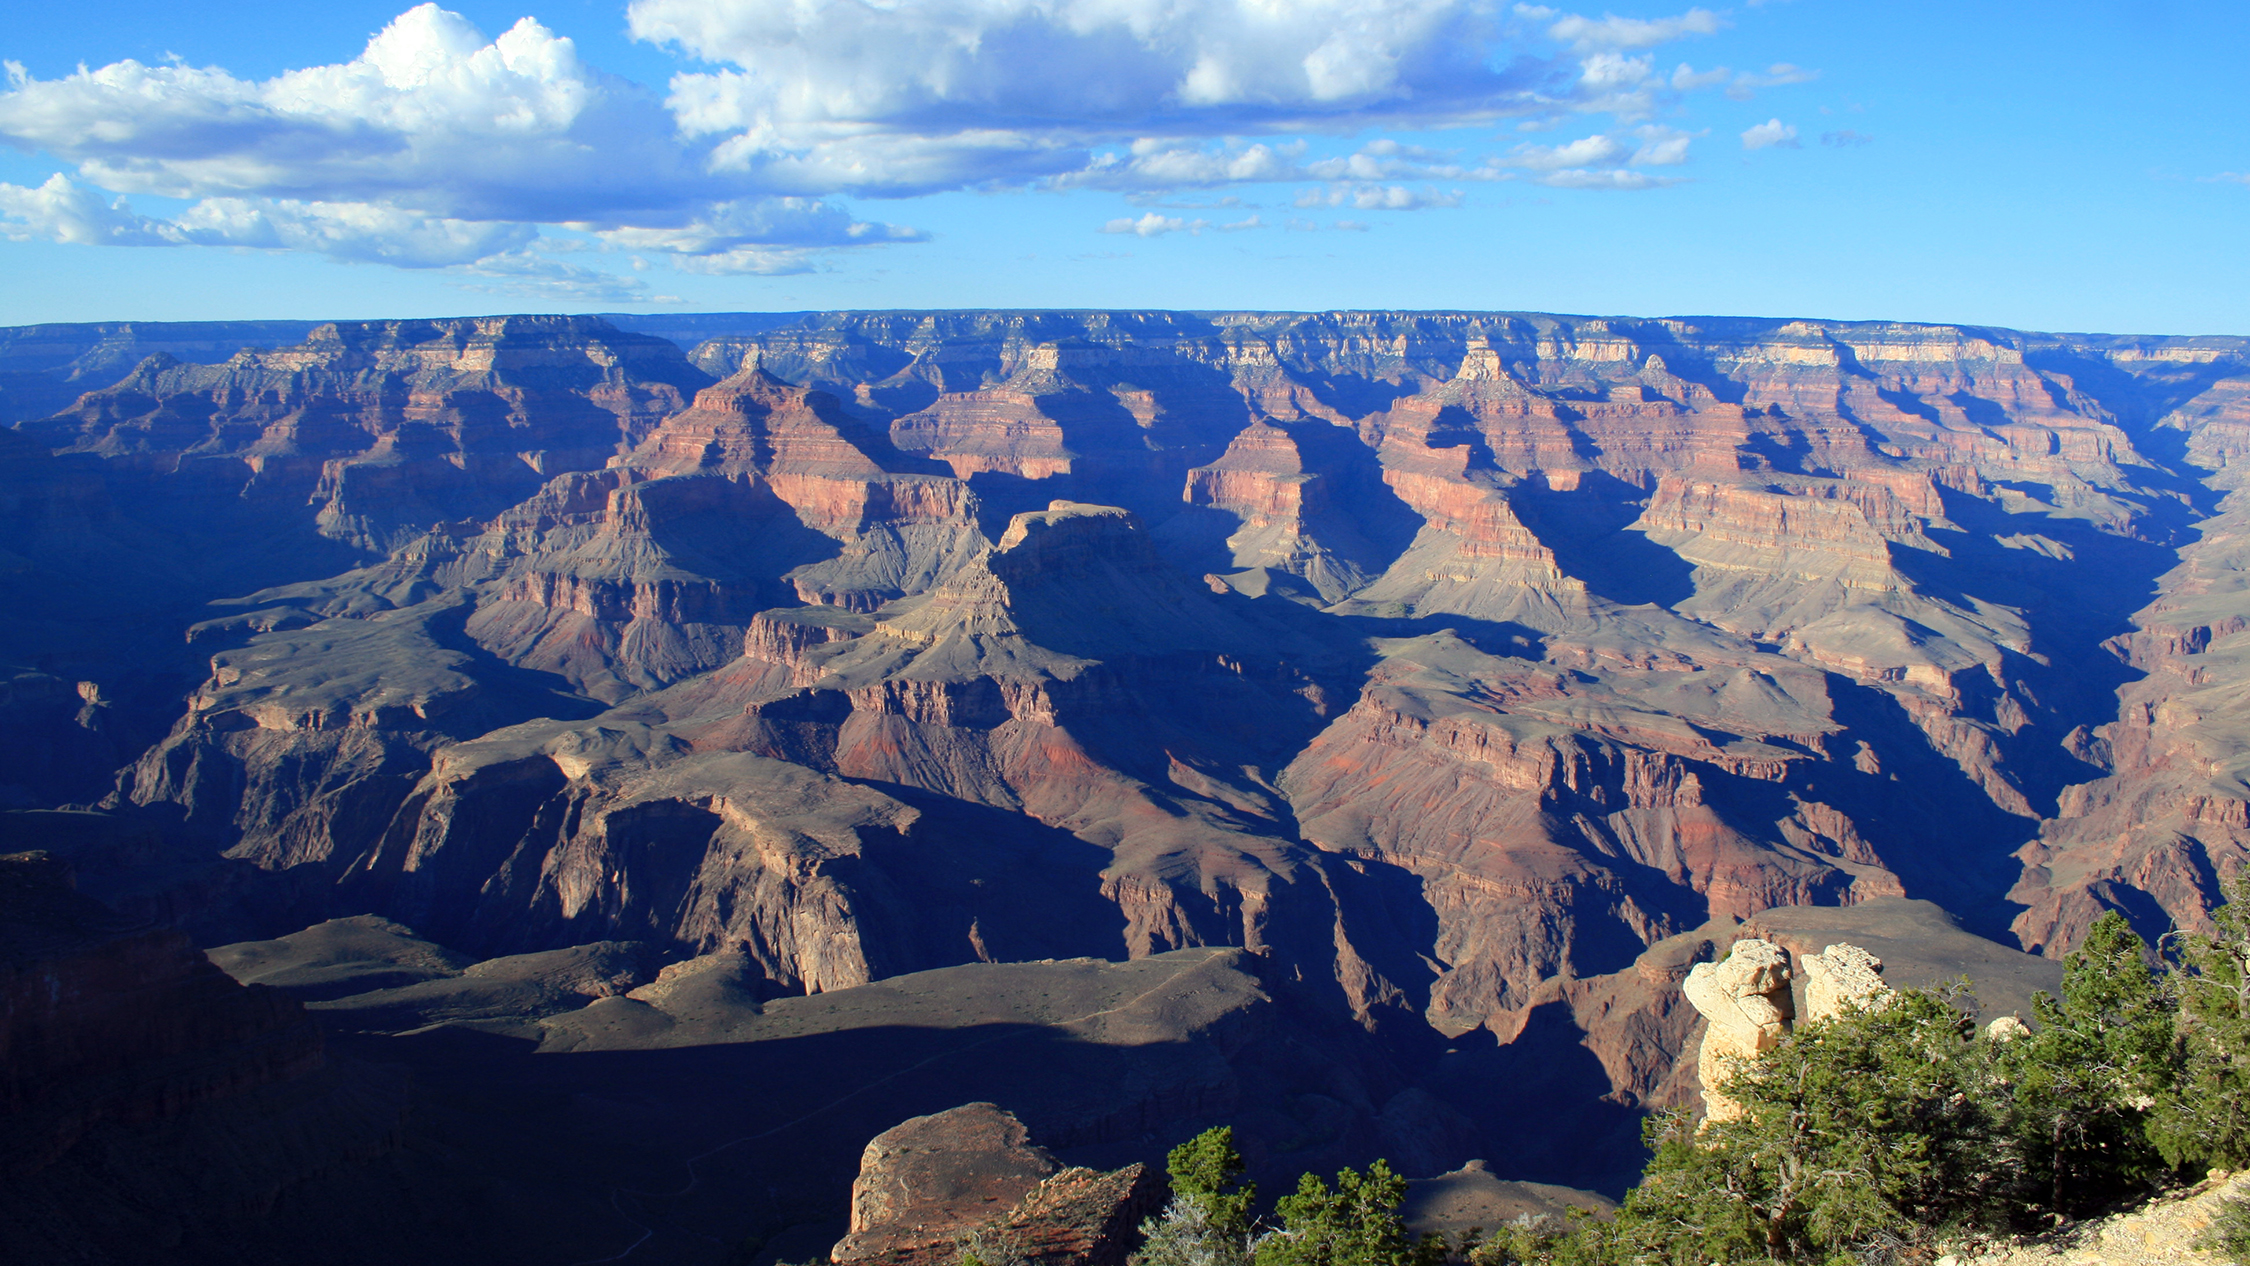 A classic Grand Canyon scene from near the Verkamp's Visitor Center